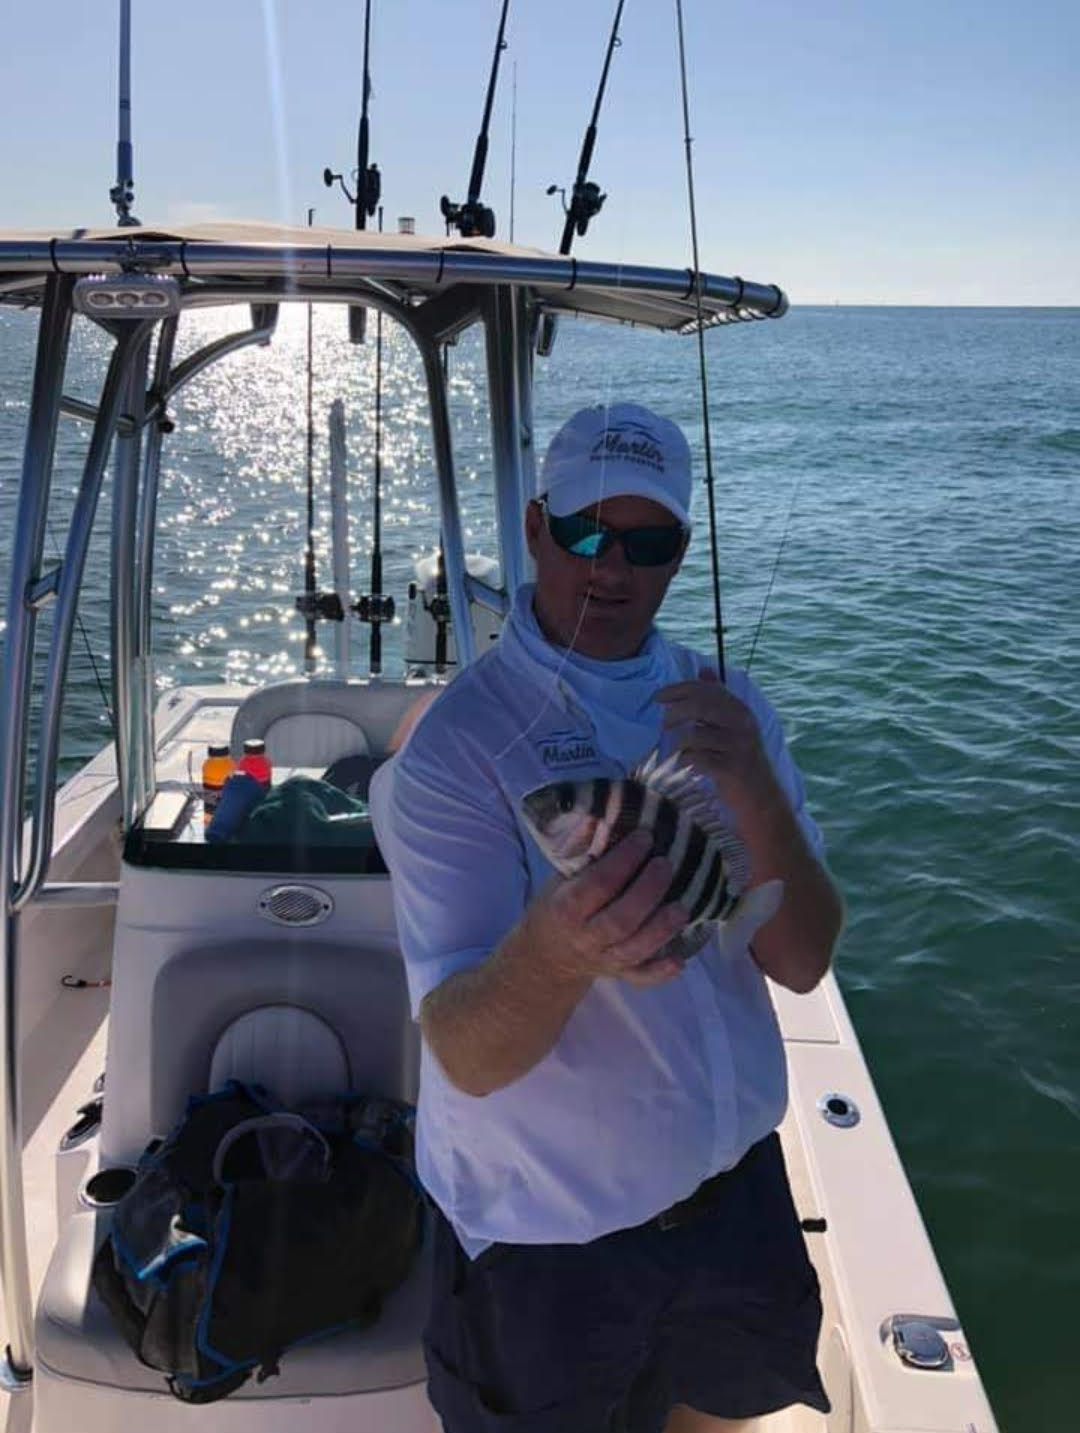 Plano Adds To Its Stable Of Professional Saltwater Anglers